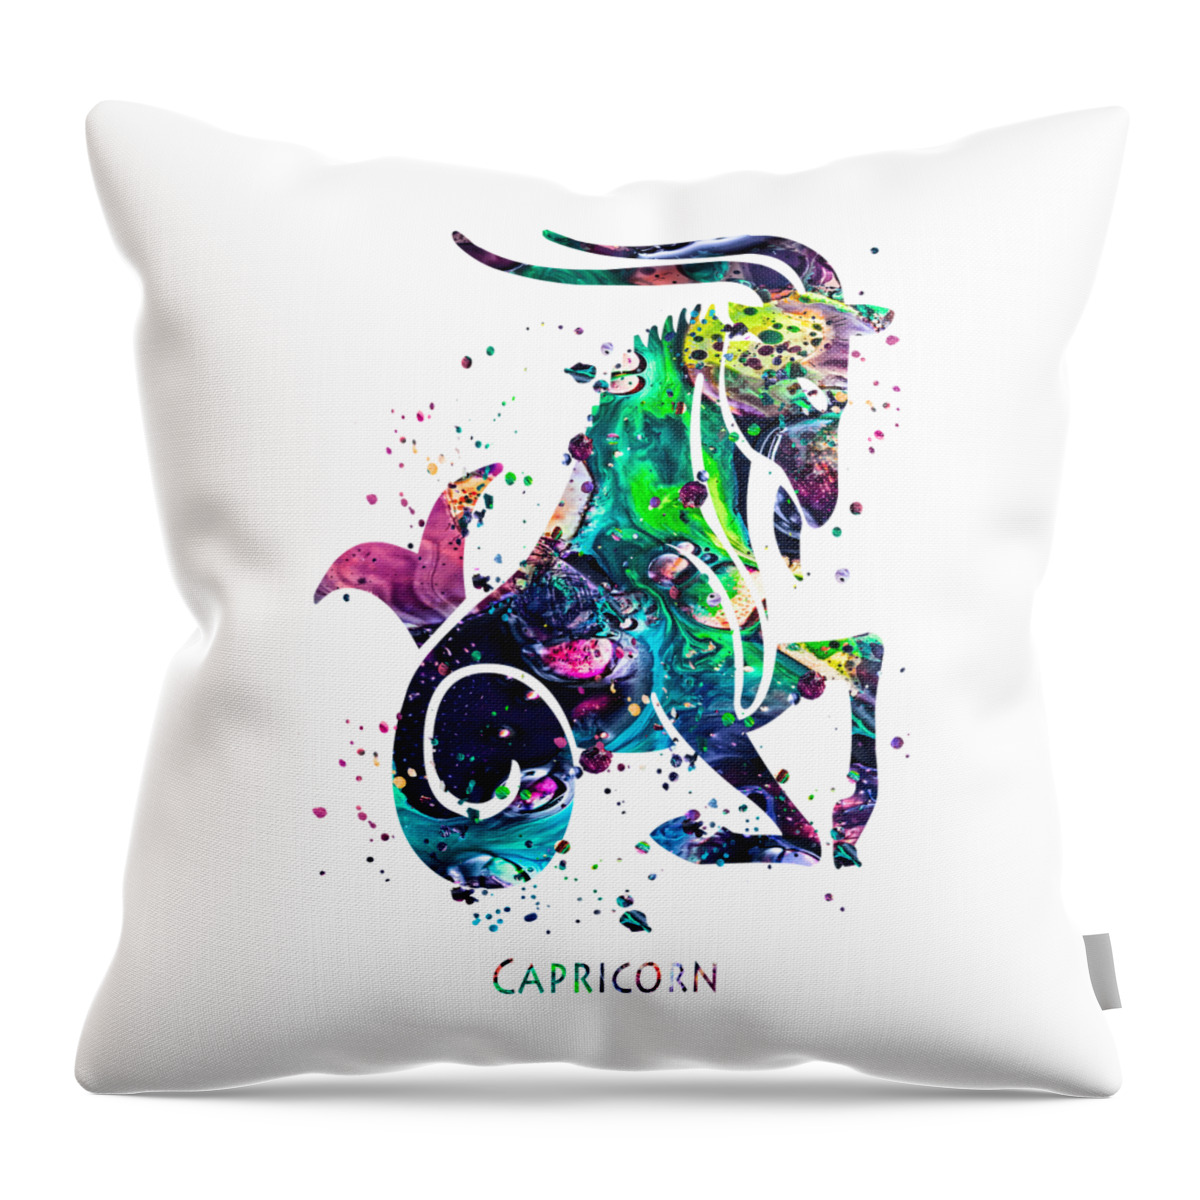 Capricorn Throw Pillow featuring the painting Capricorn Zodiac Sign by Zuzi 's